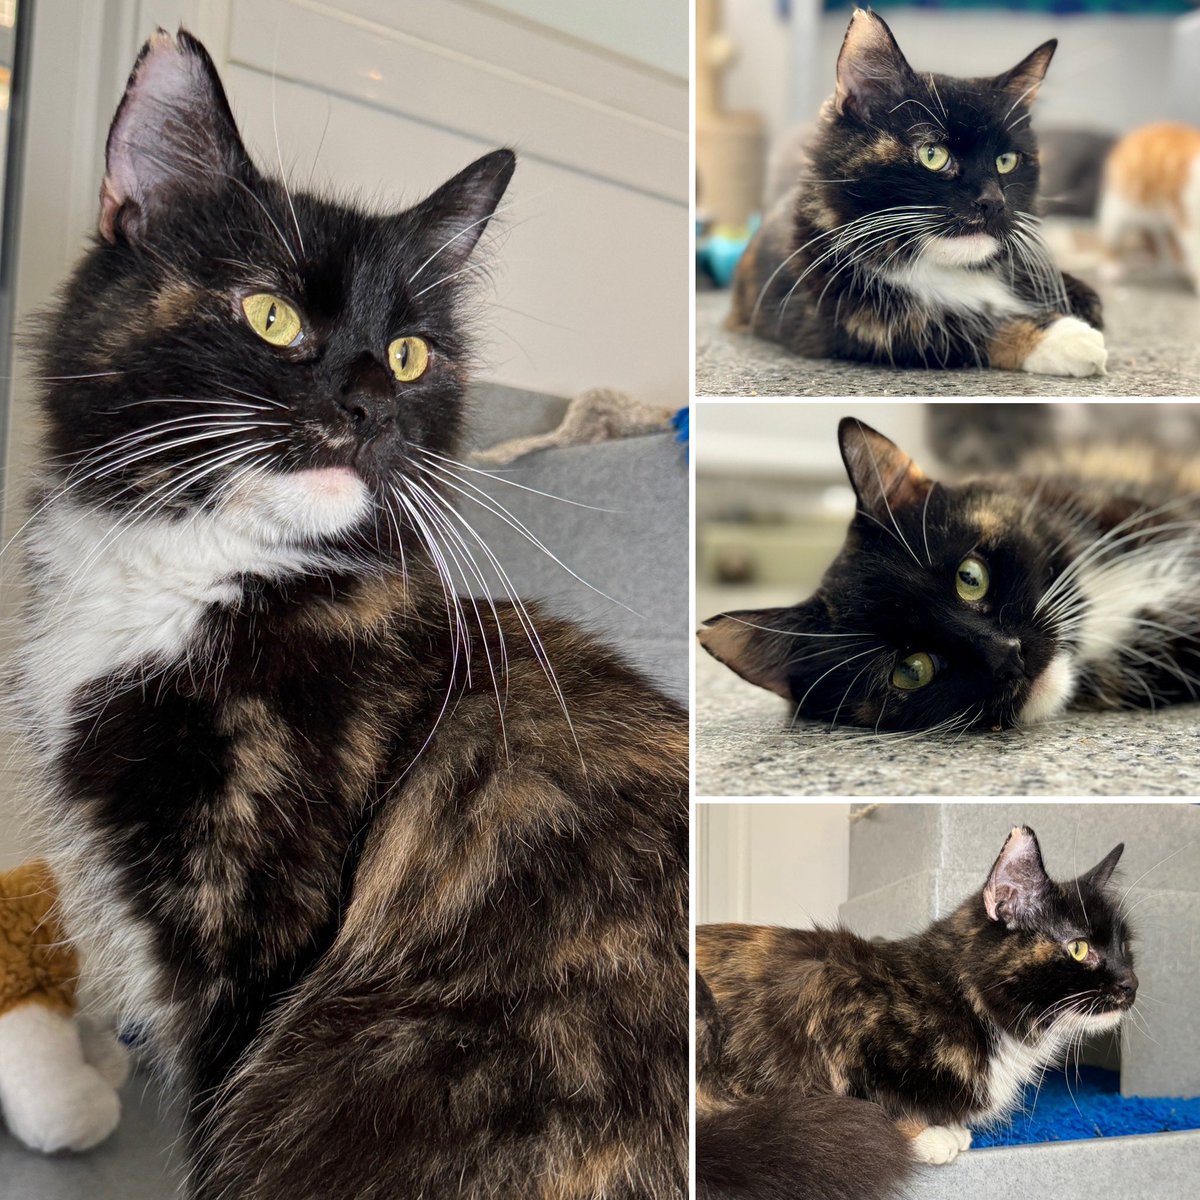 Good morning #CatsOnTwitter Potter, Tinky Winky, Tim, Jayden, Colin and Edison have all gone home over the weekend. Also, Mel (pictured below) has left for her ‘furever’ home 🎉 #CatsOnX #MondayMotivation #AdoptDontShop #BankHoliday